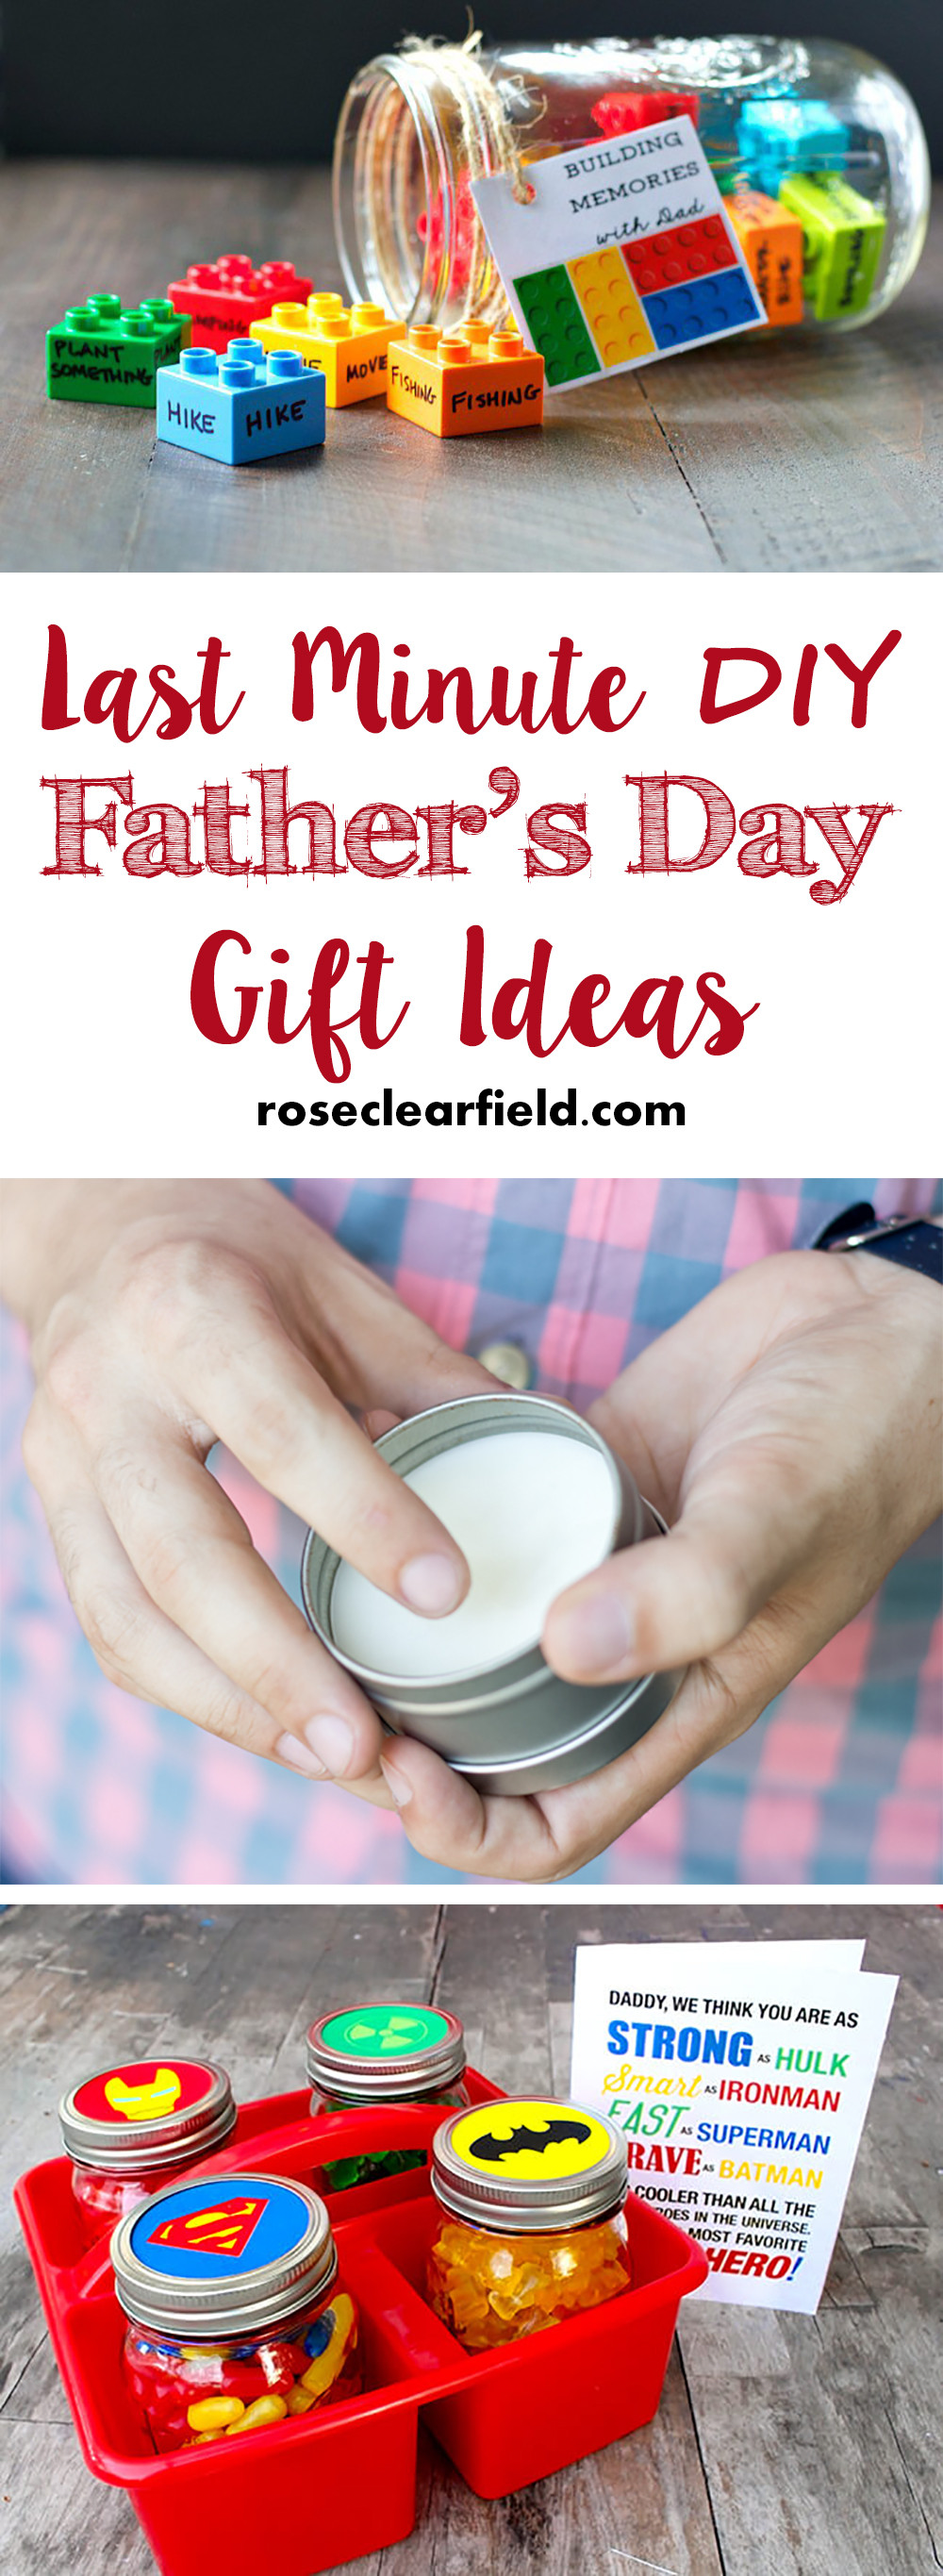 Father'S Day Food Gift Ideas
 Last Minute DIY Father s Day Gift Ideas • Rose Clearfield